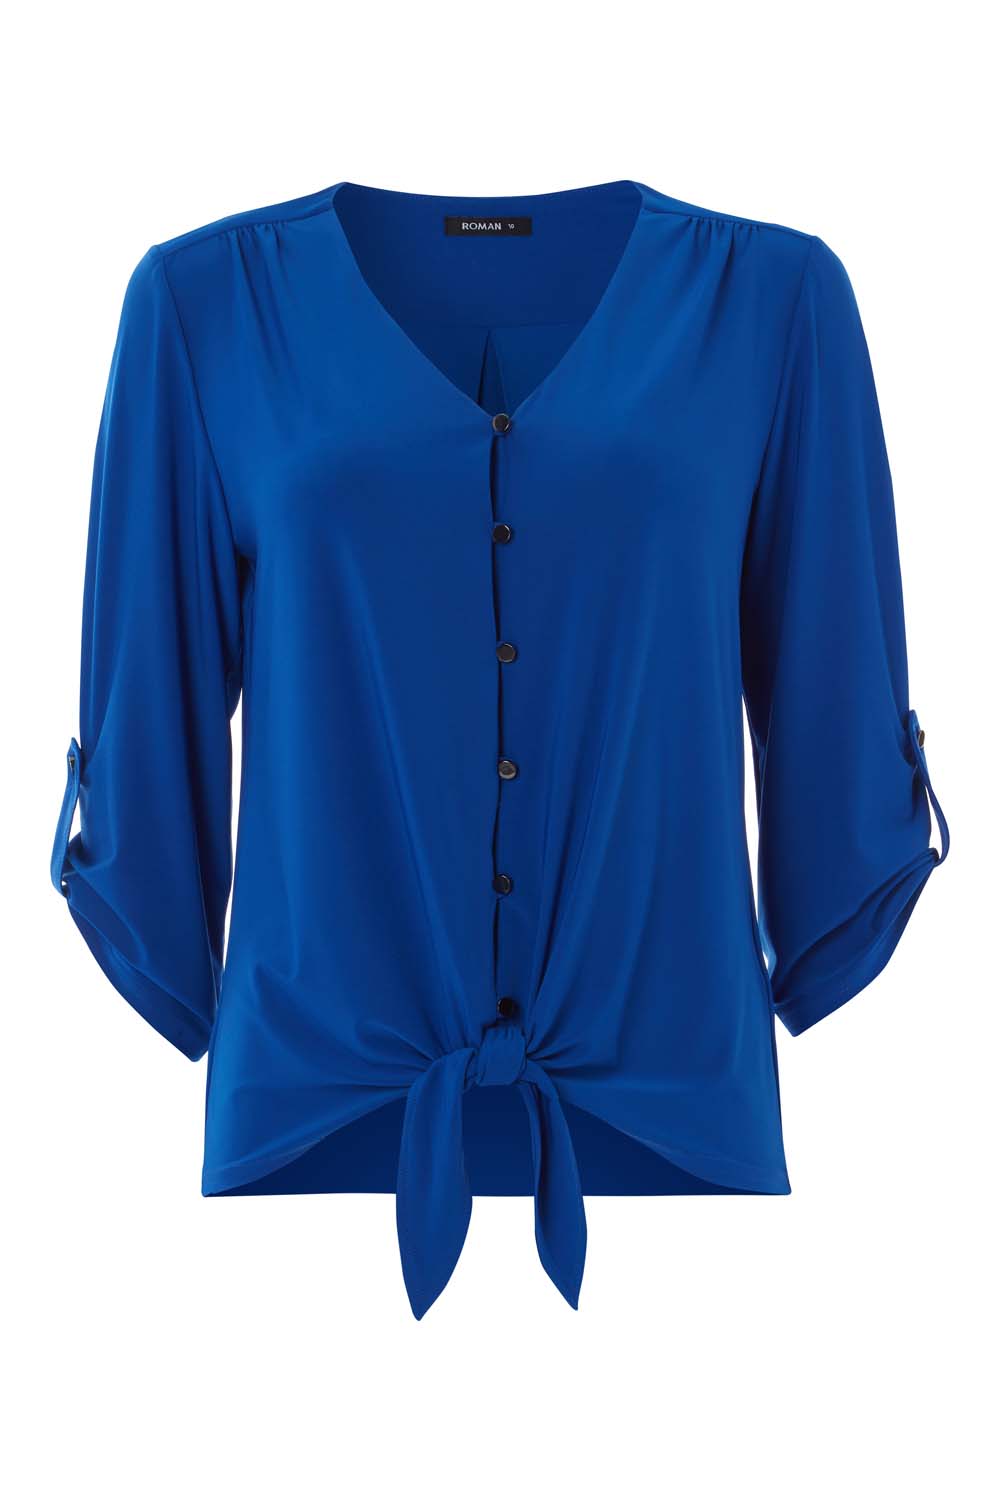 Royal Blue Tie Front Button Up Blouse, Image 4 of 8